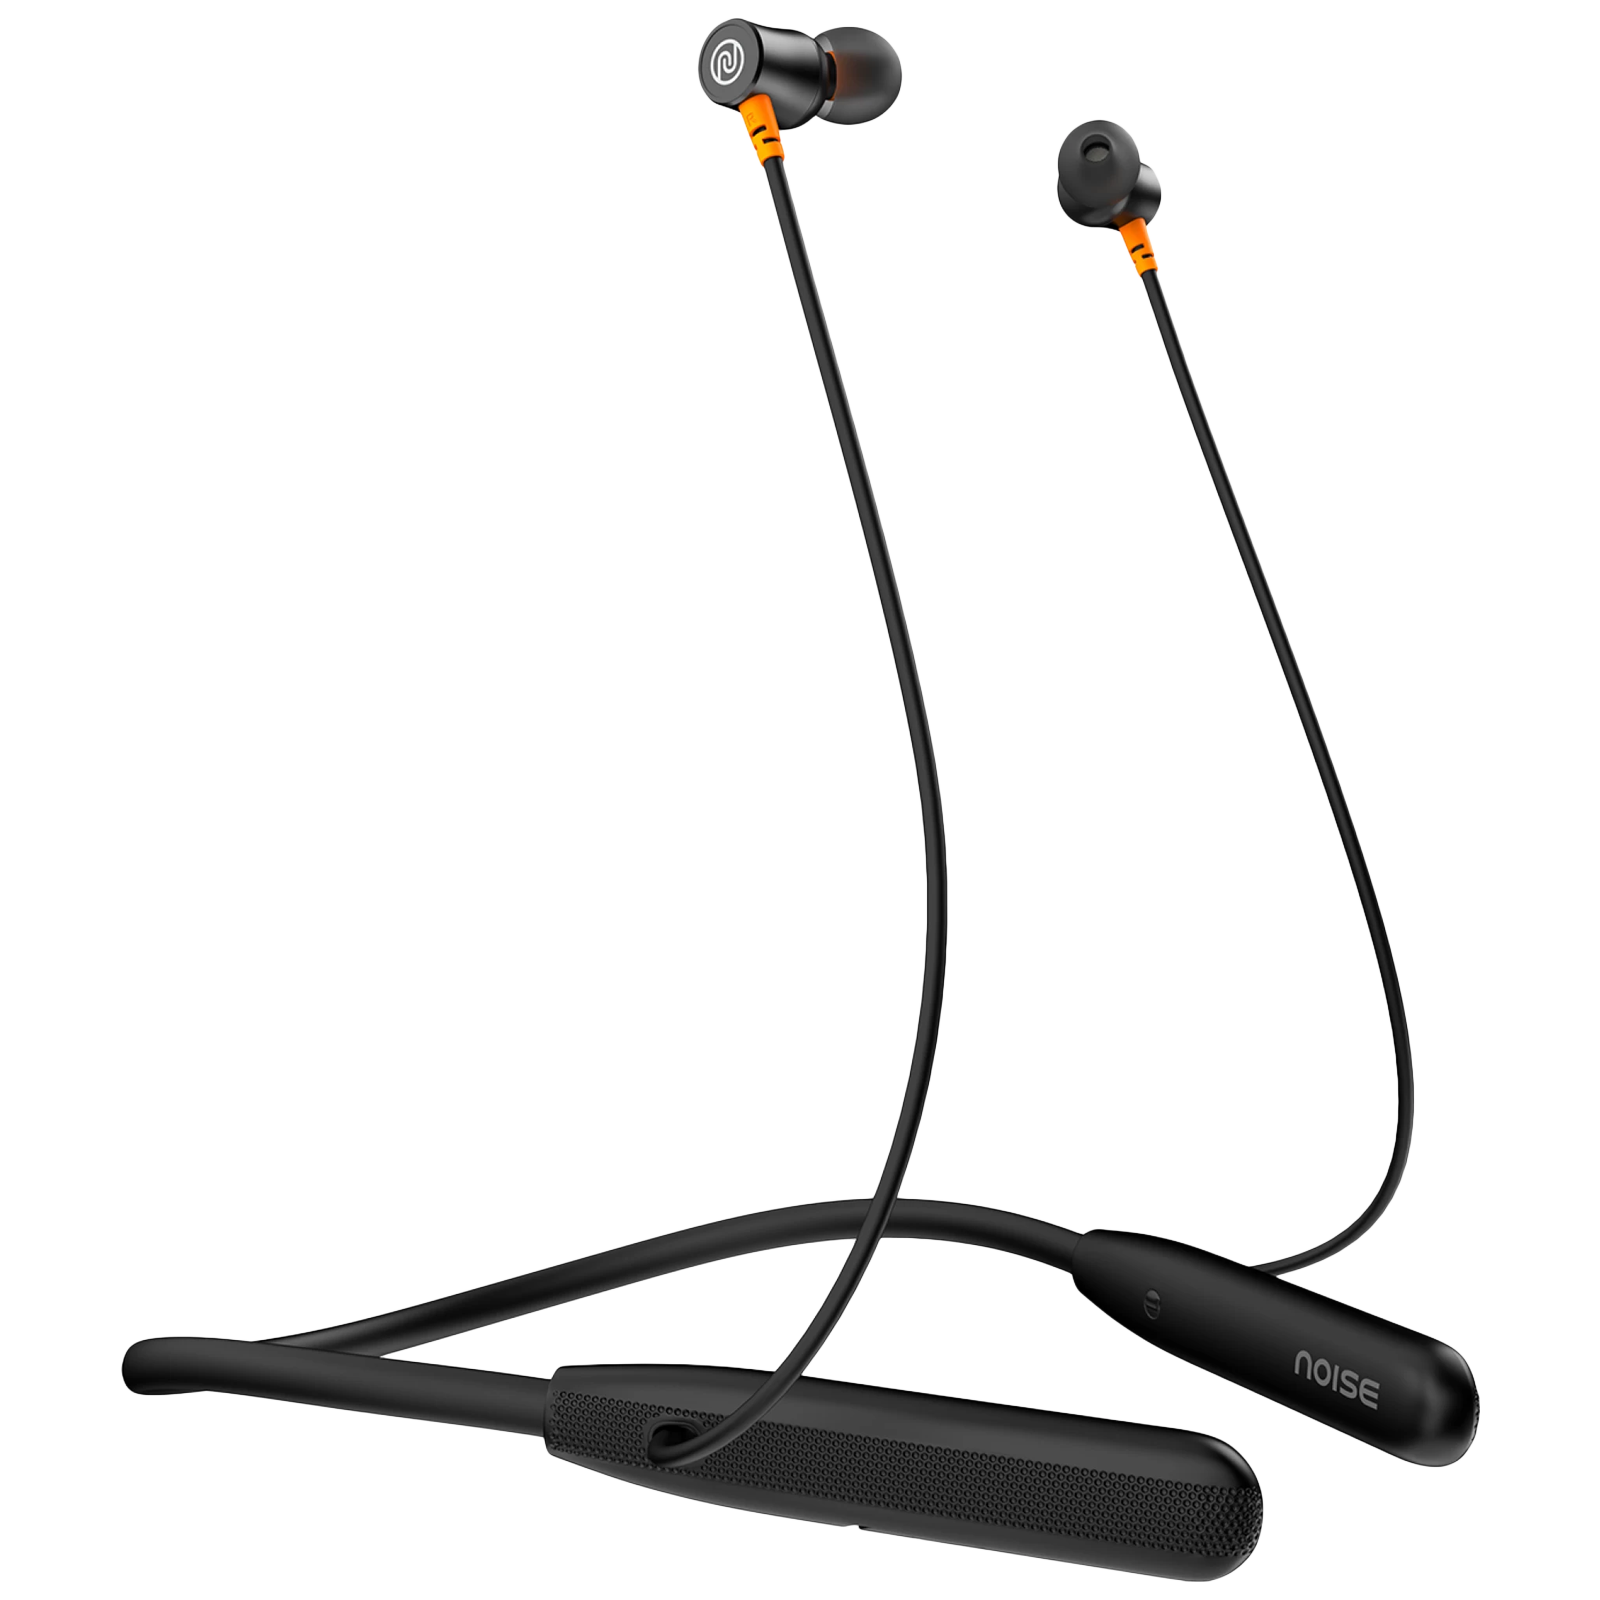 noise Airwave Neckband with Environmental Noise Cancellation (IPX5 Water Resistant, 3 EQ Modes, Jet Black)